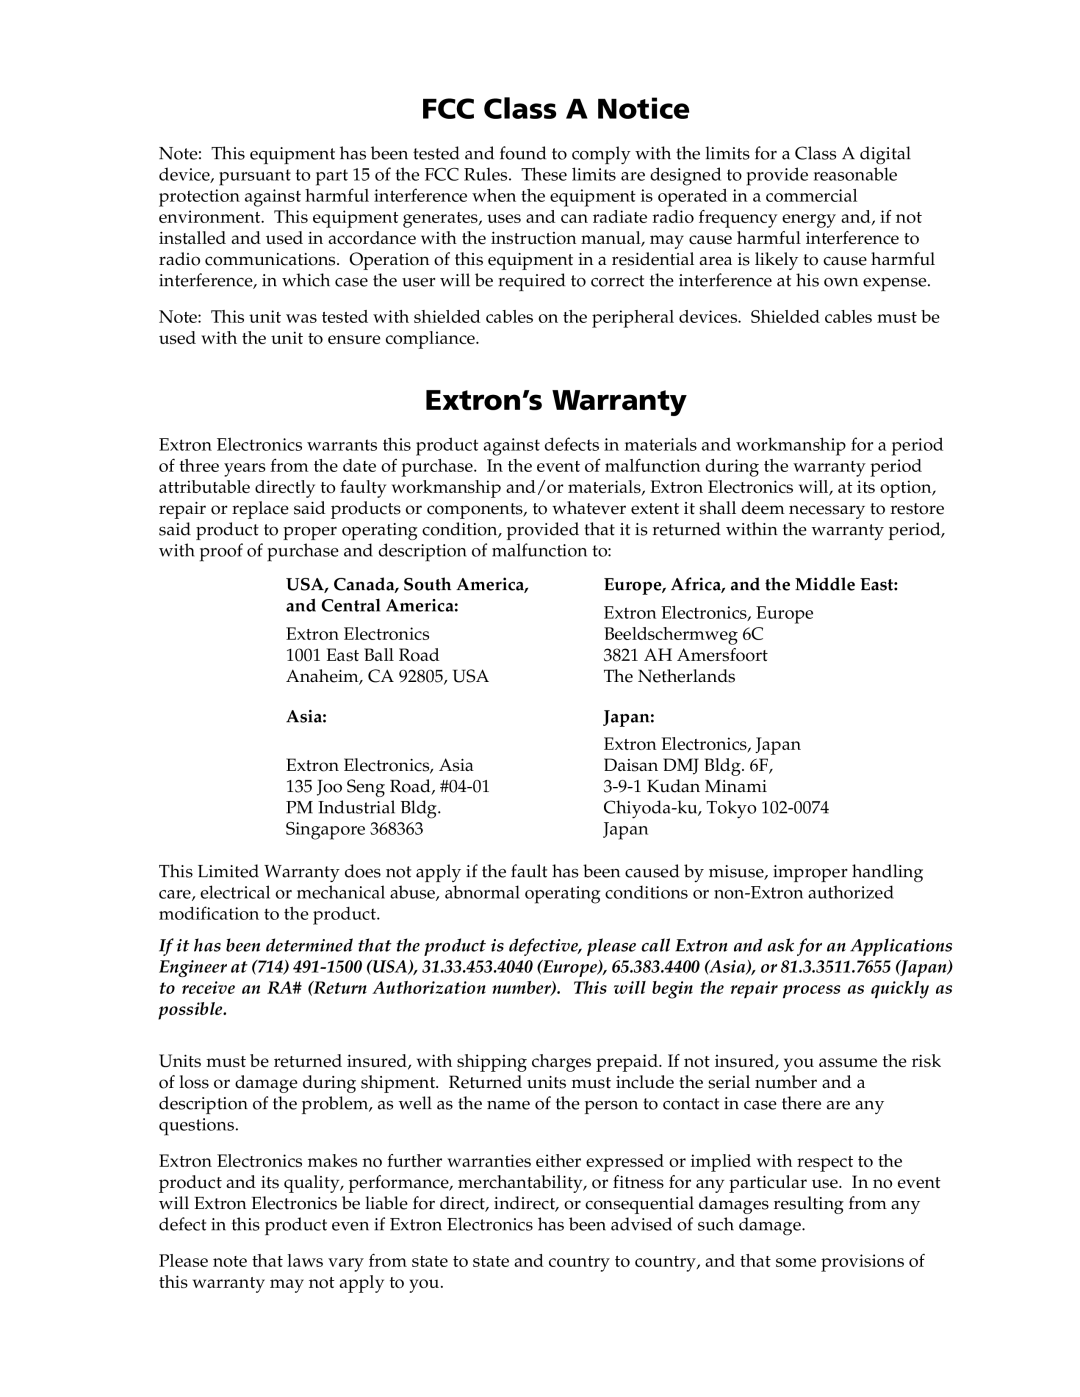 Extron electronic 88 FCC Class A Notice, Extron’s Warranty, USA, Canada, South America, and Central America, Asia, Japan 